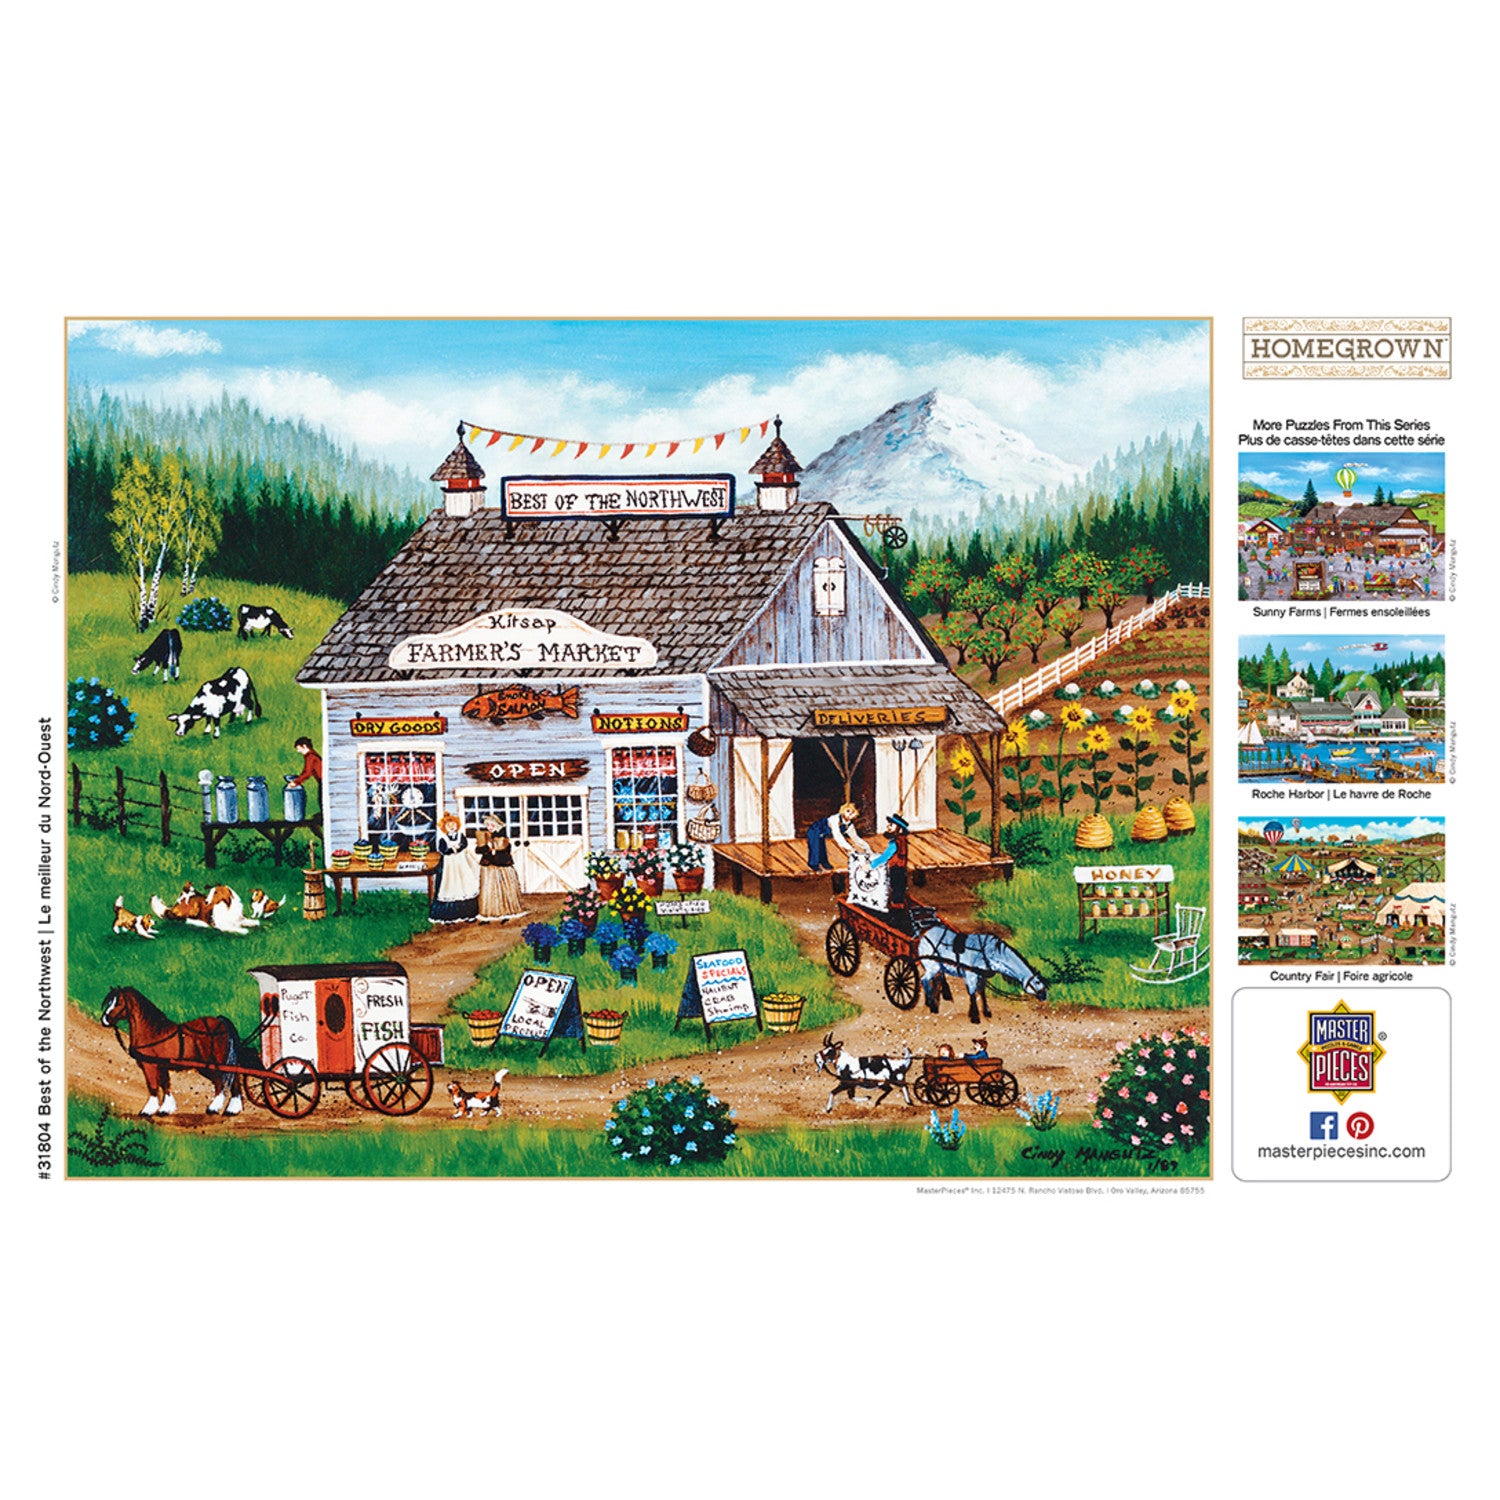 Homegrown - Best of the Northwest 750 Piece Puzzle